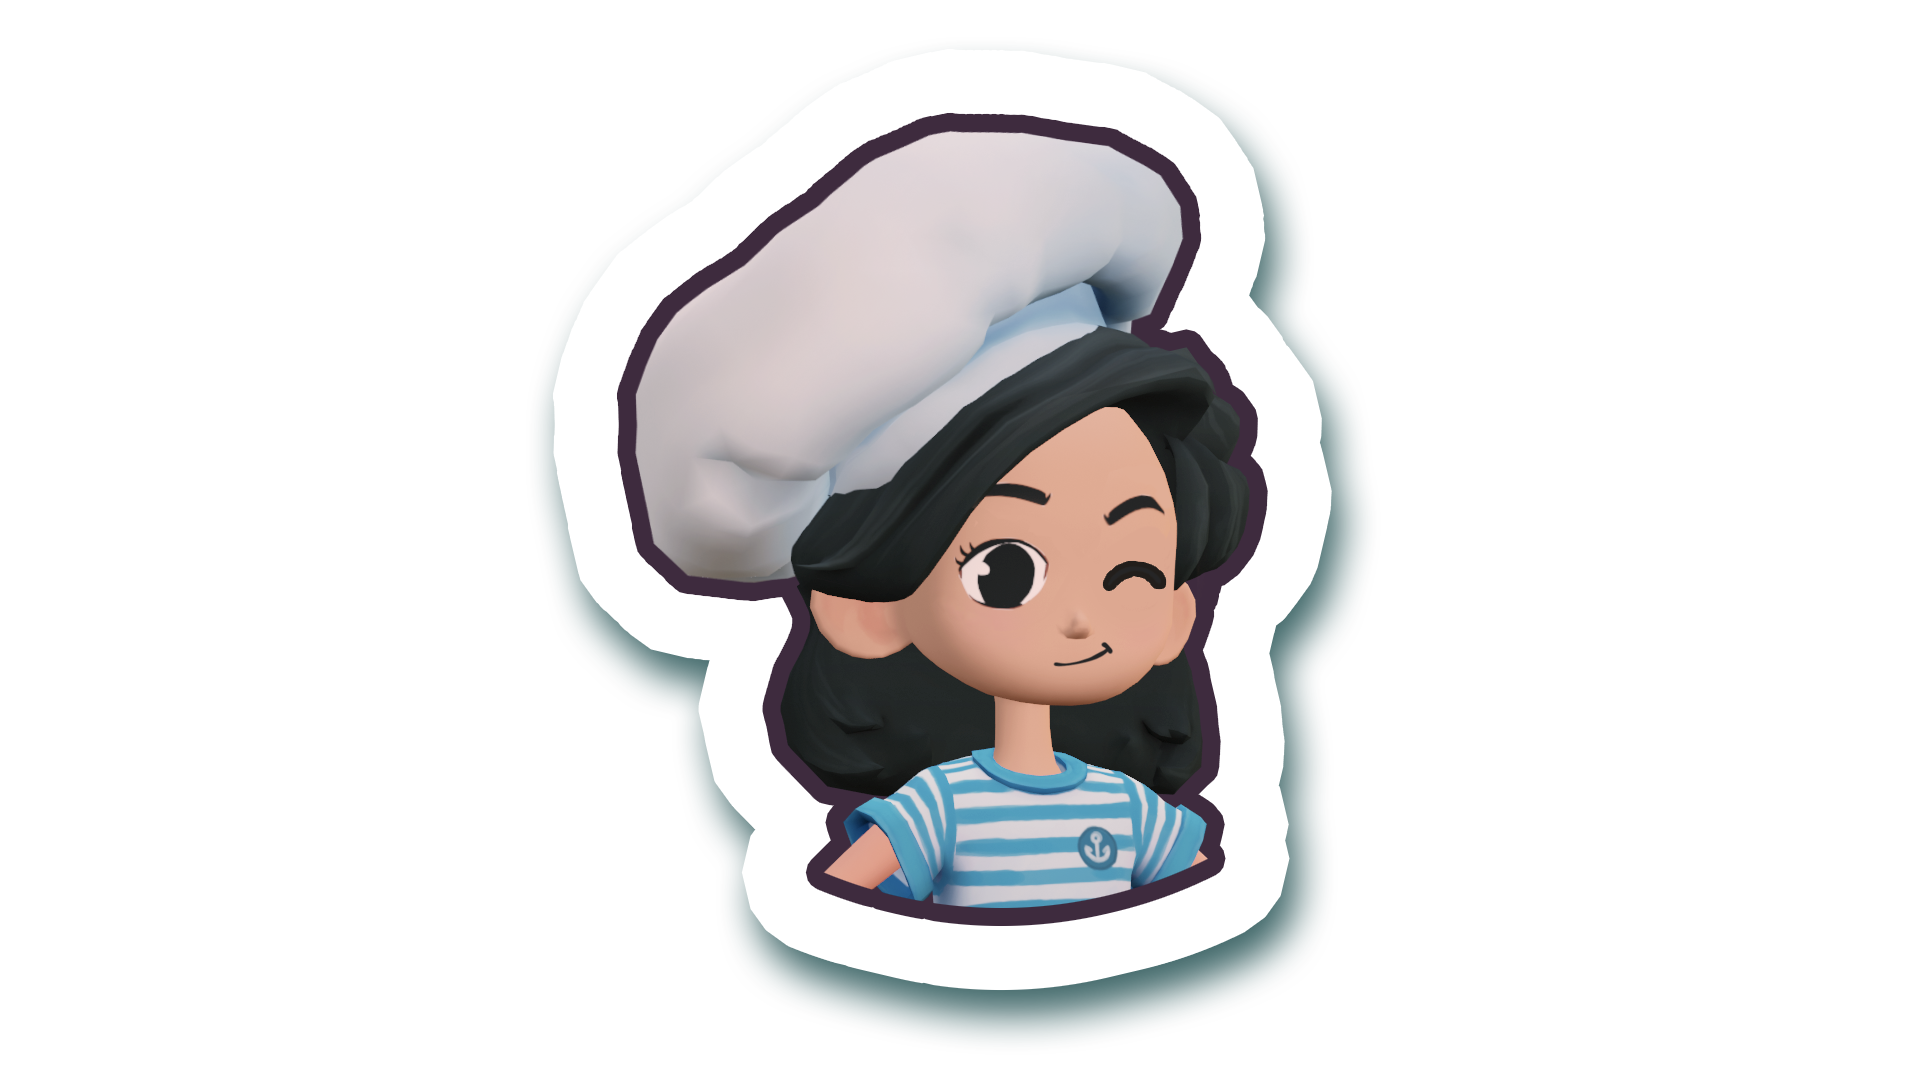 Icon for Master chef